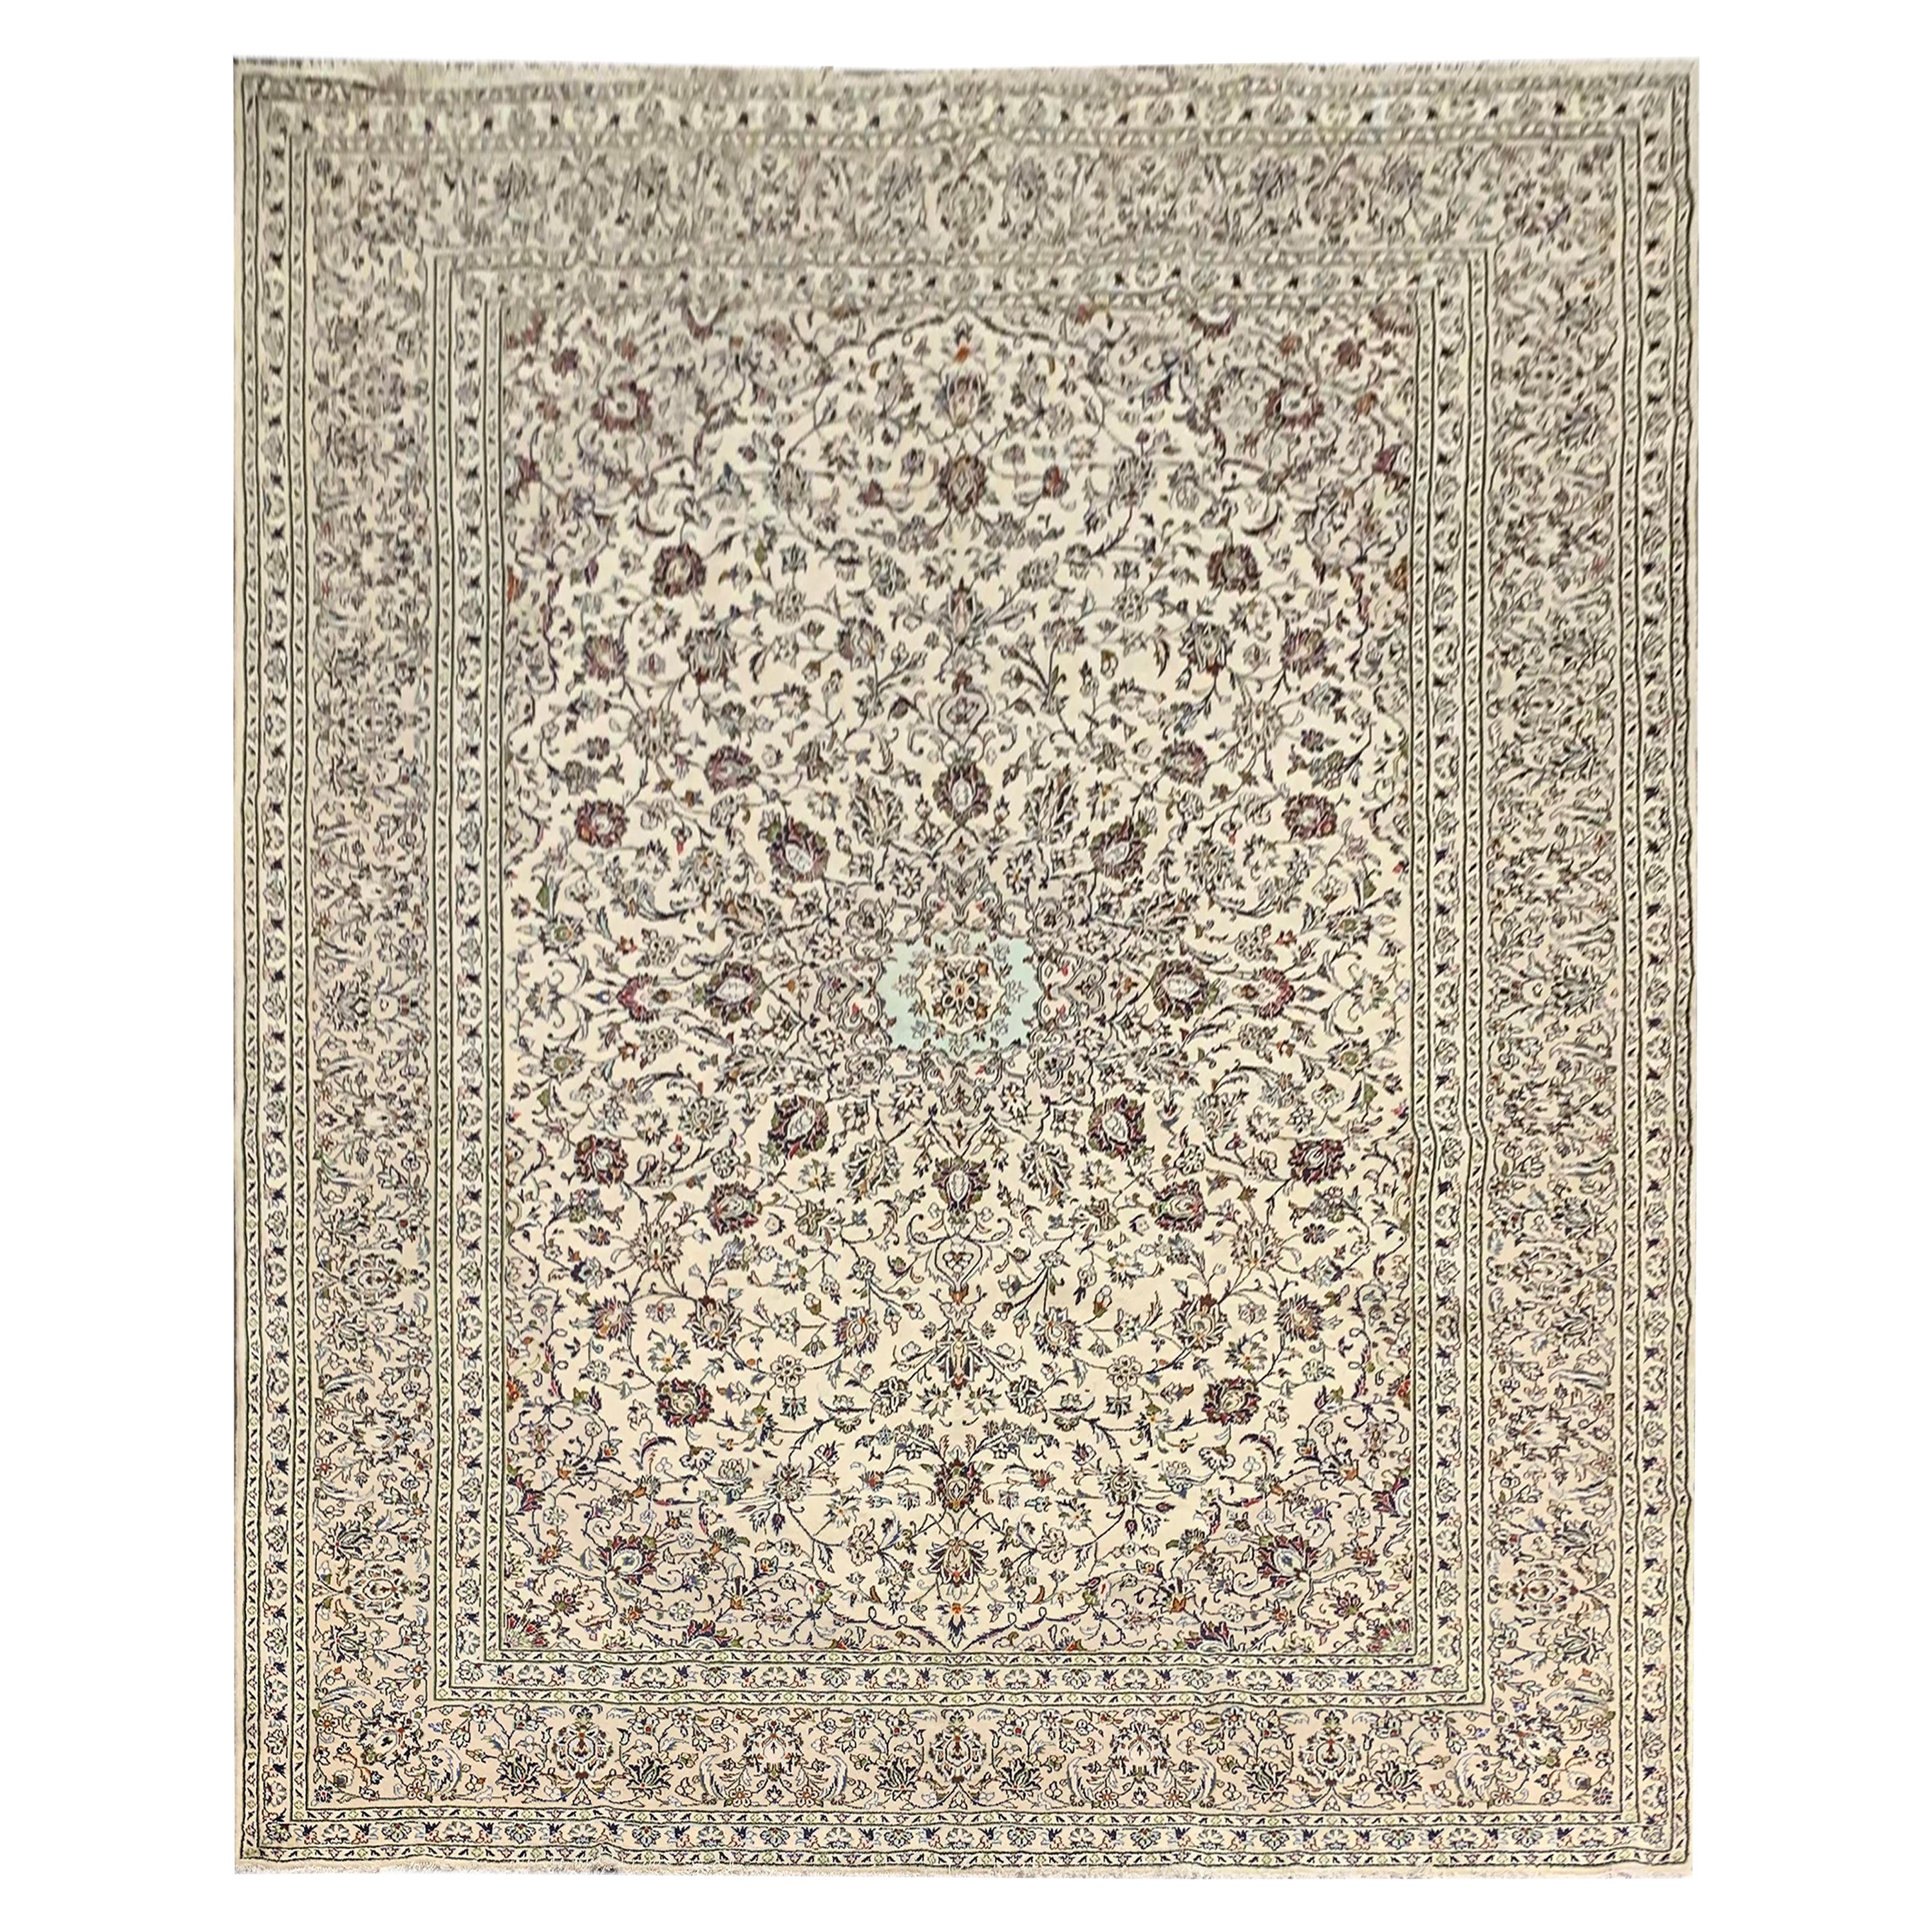 Traditional Wool Area Rug Handwoven Oriental Cream Brown Area Rug For Sale